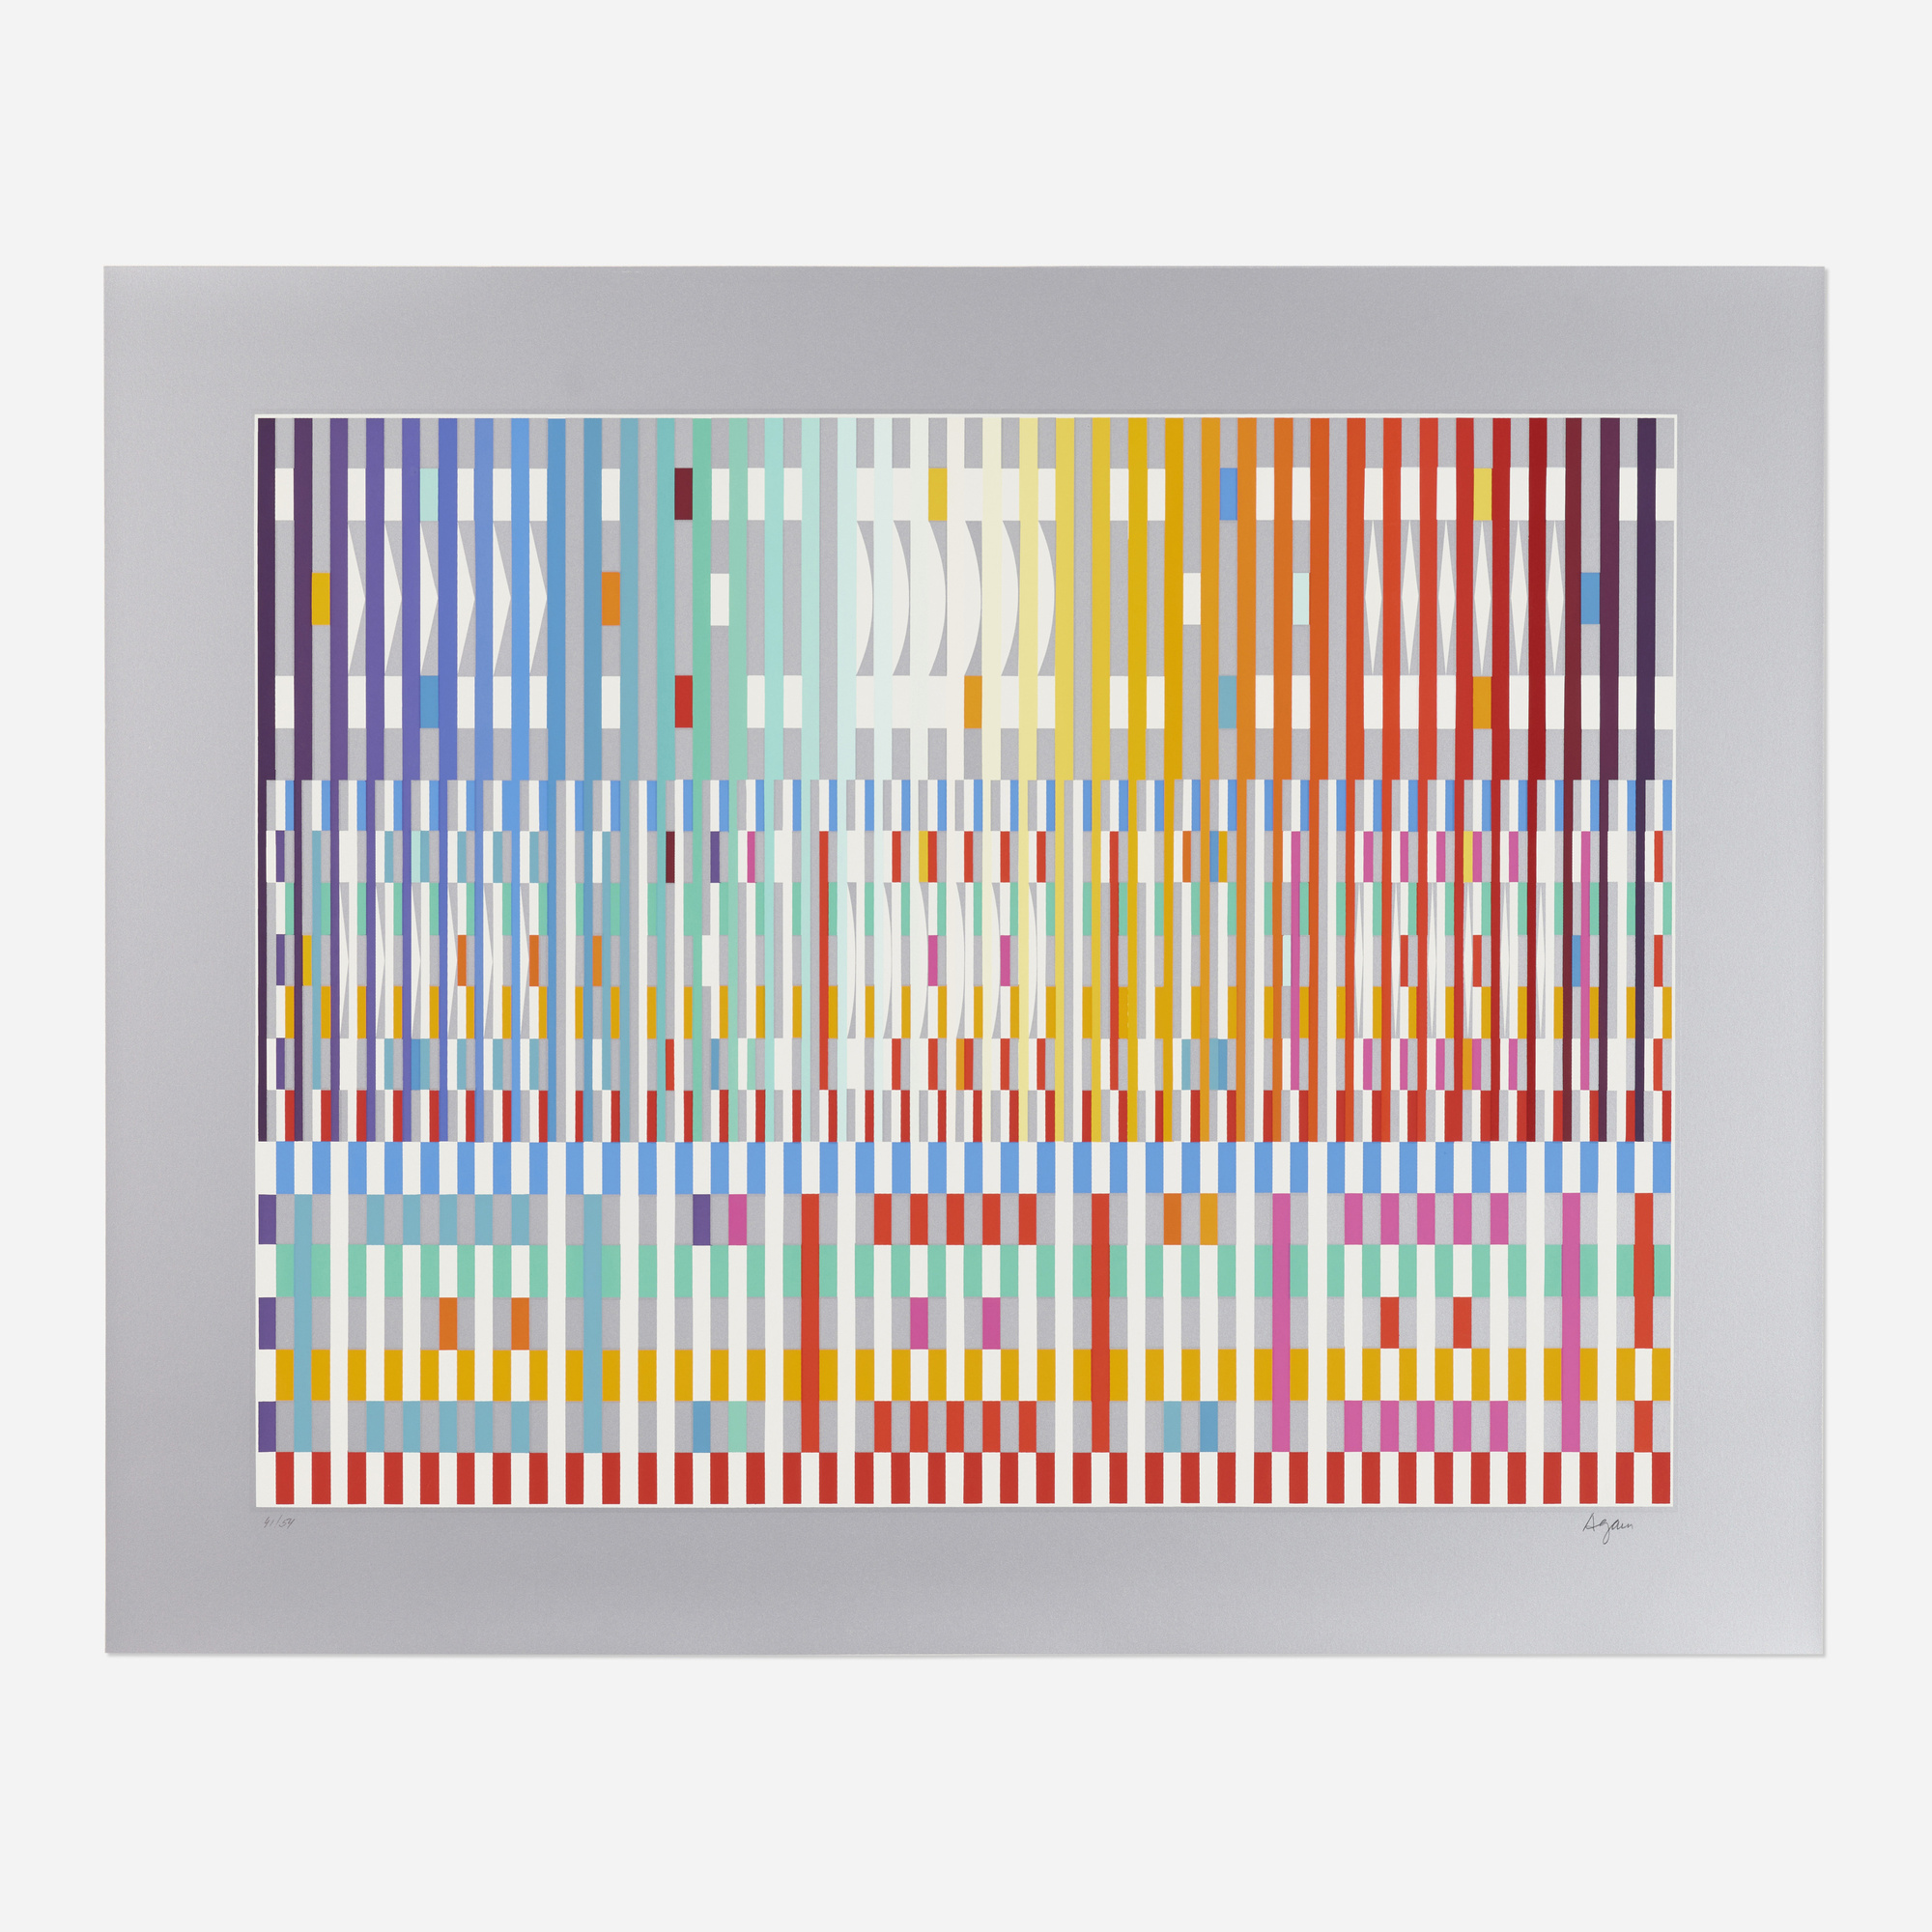 356: YAACOV AGAM, The Blessing < Living Contemporary, 1 March 2023